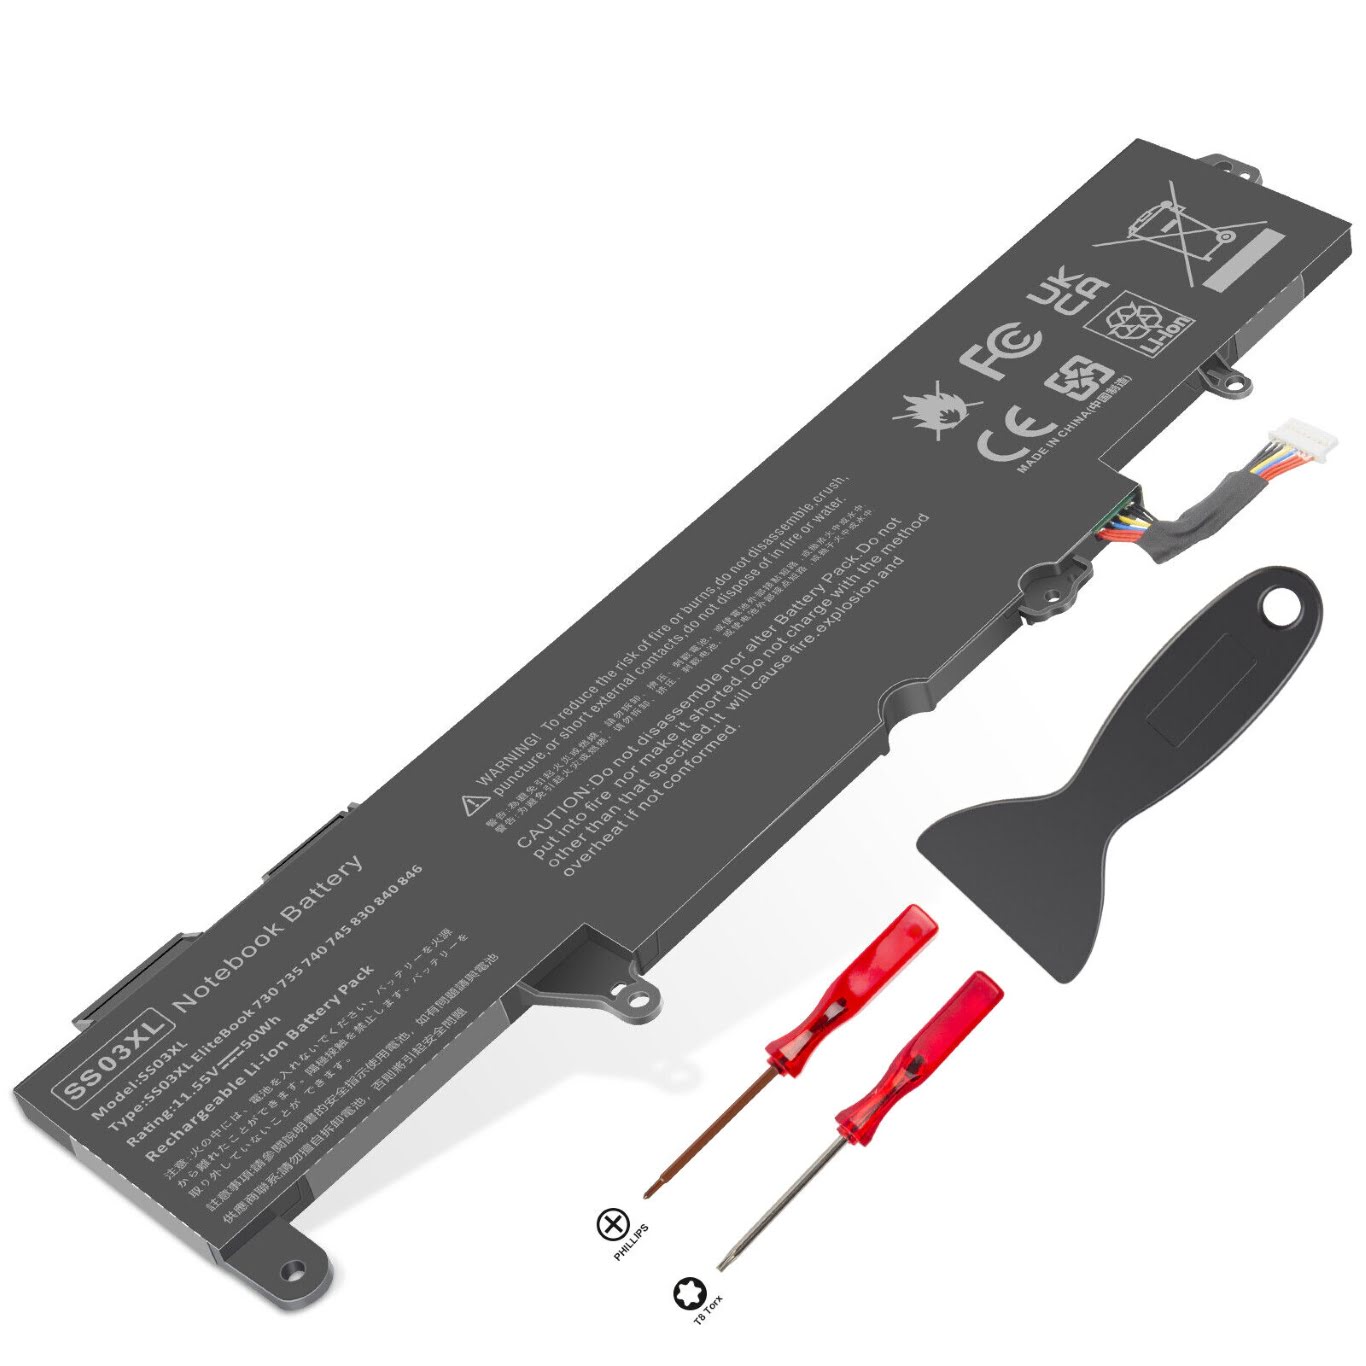 932823-421, 933321-855 replacement Laptop Battery for HP EliteBook 730, EliteBook 735, 11.55v, 50wh, 3 cells